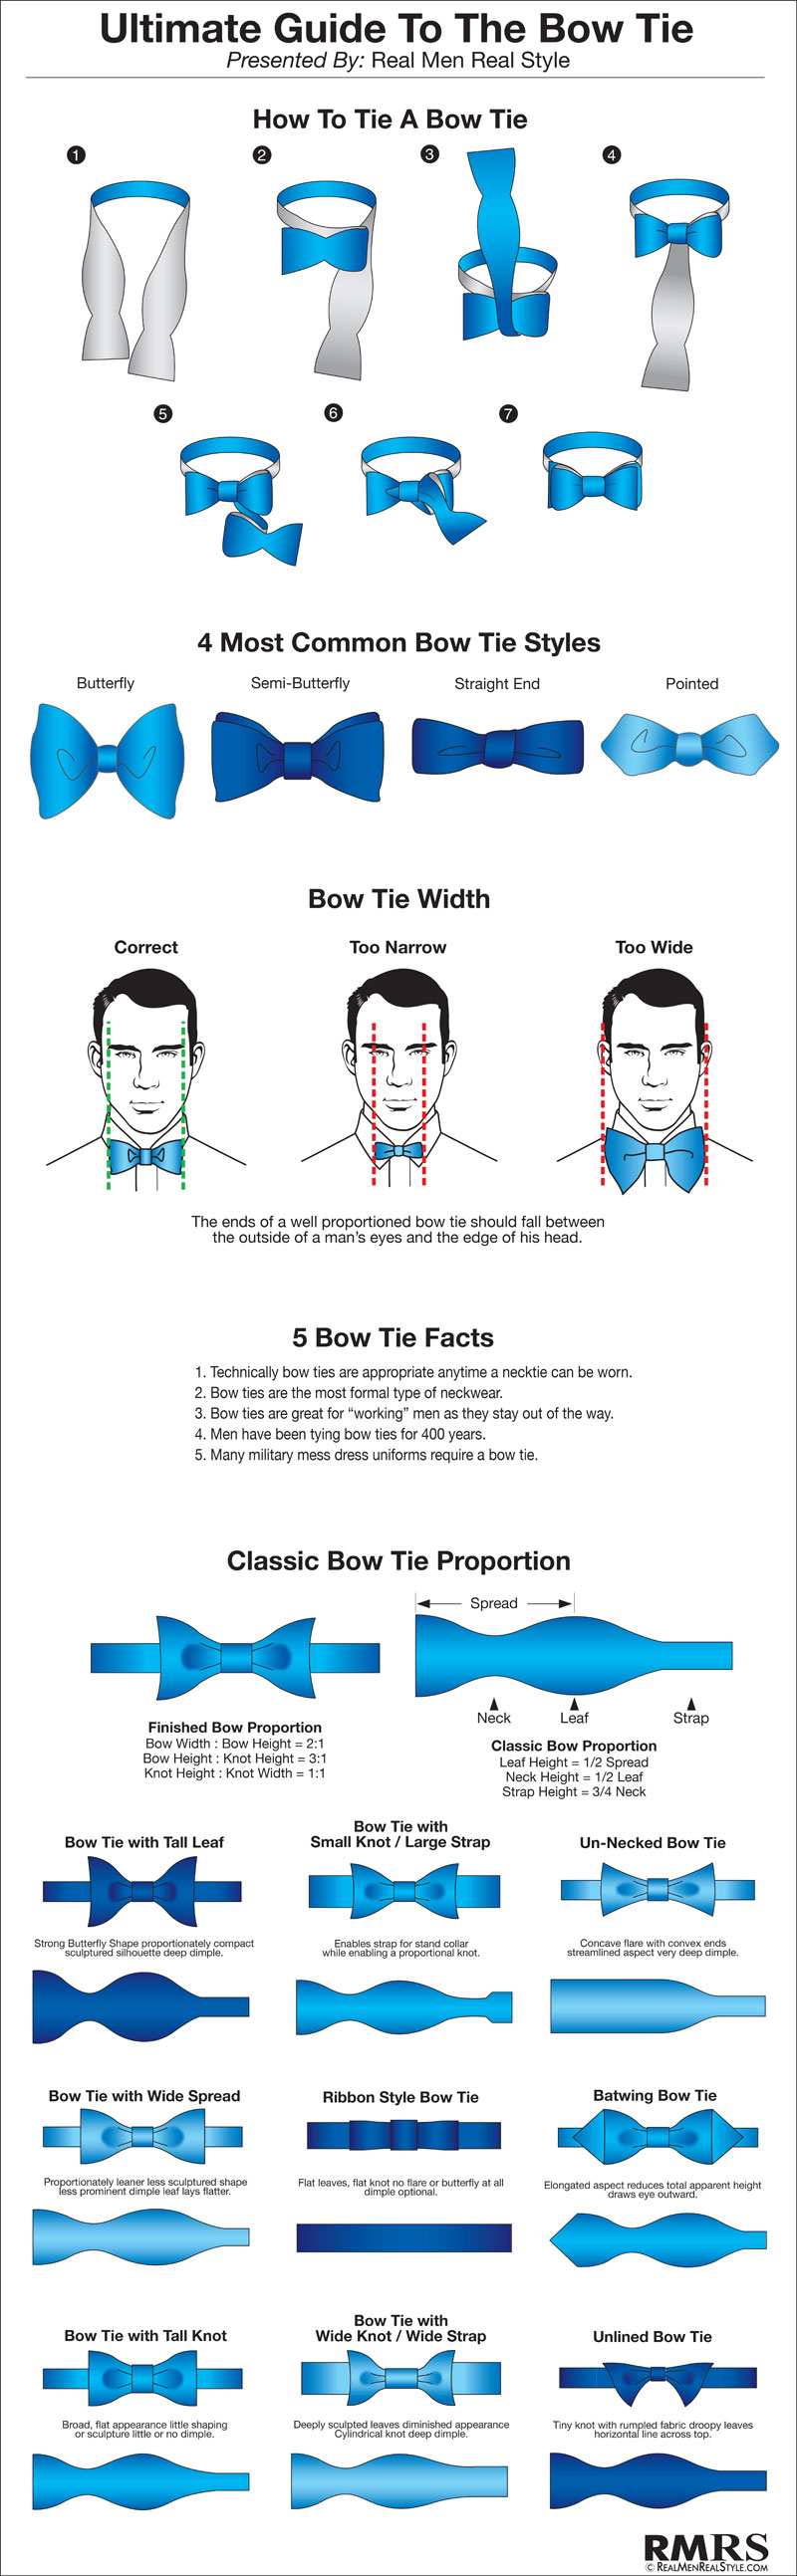 Ultimate-guide-to-bow-tie